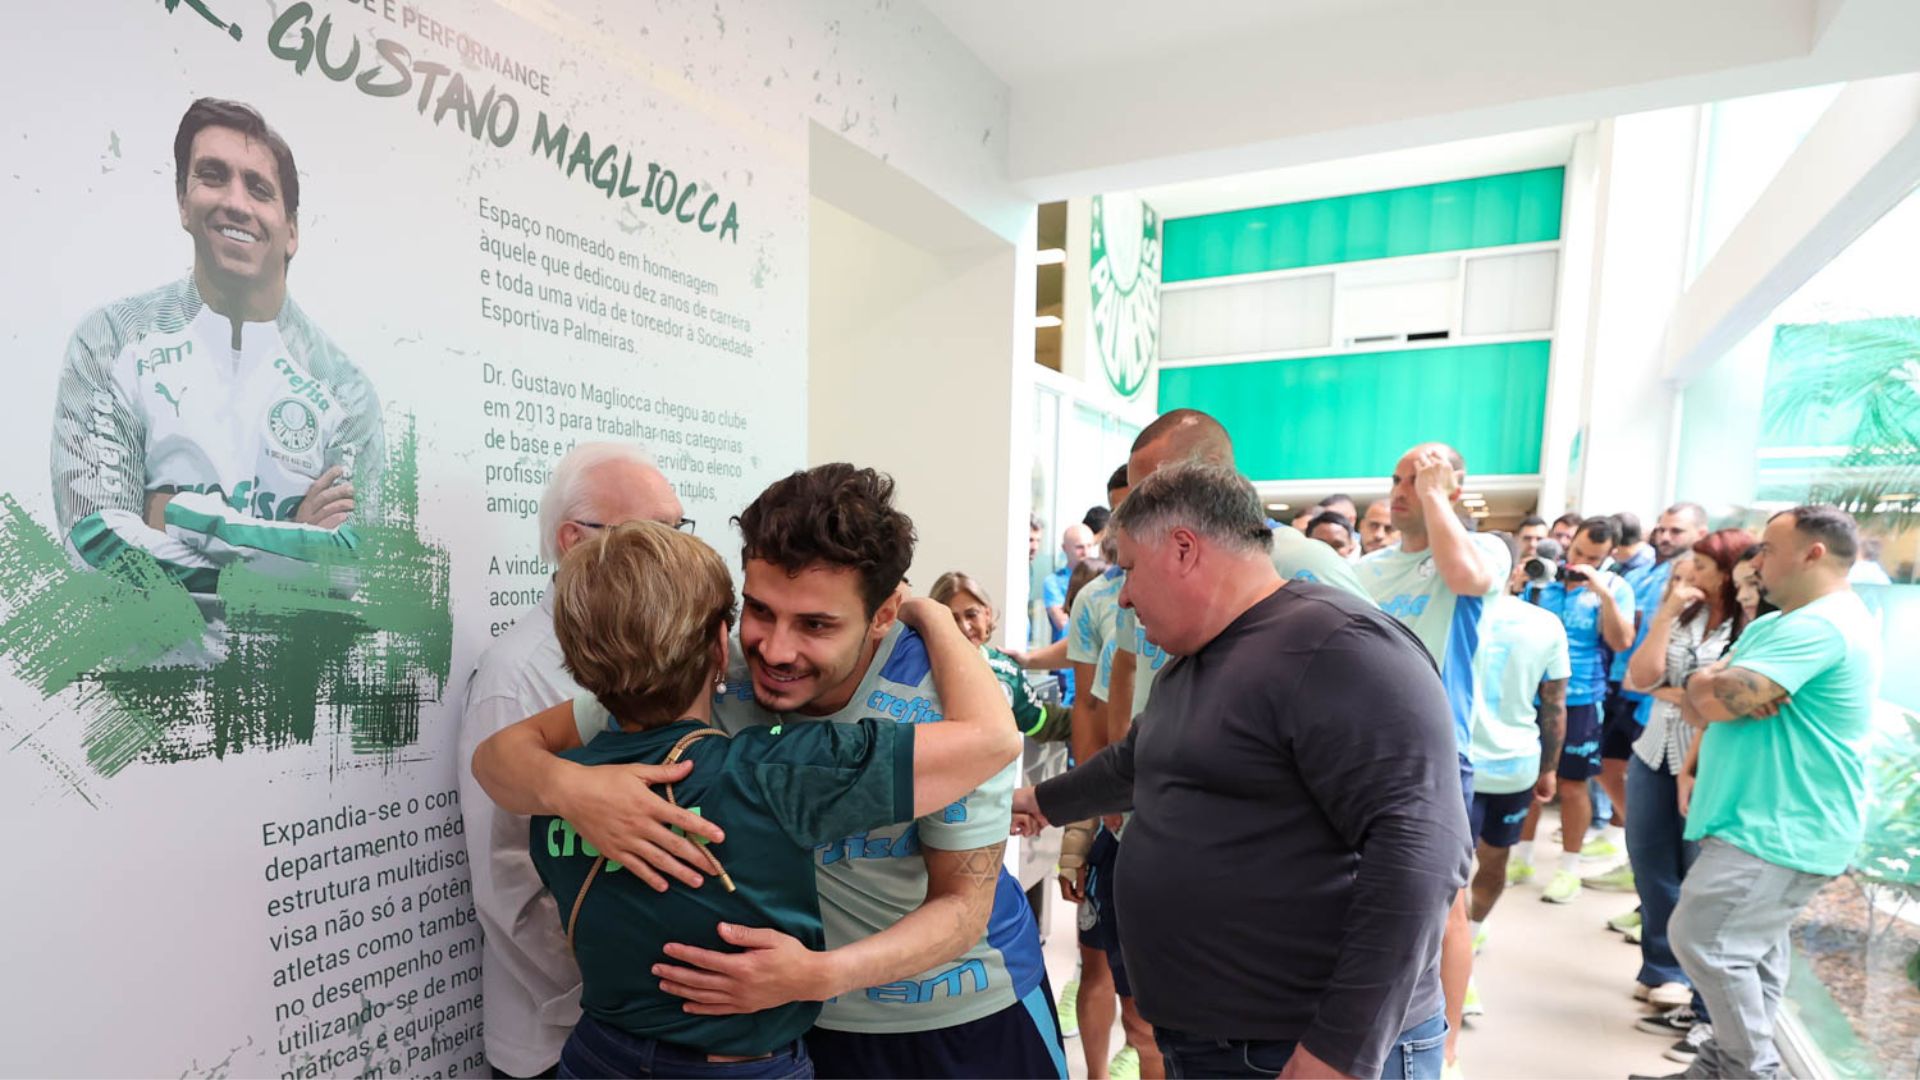 Palmeiras pays homage to Gustavo Magliocca